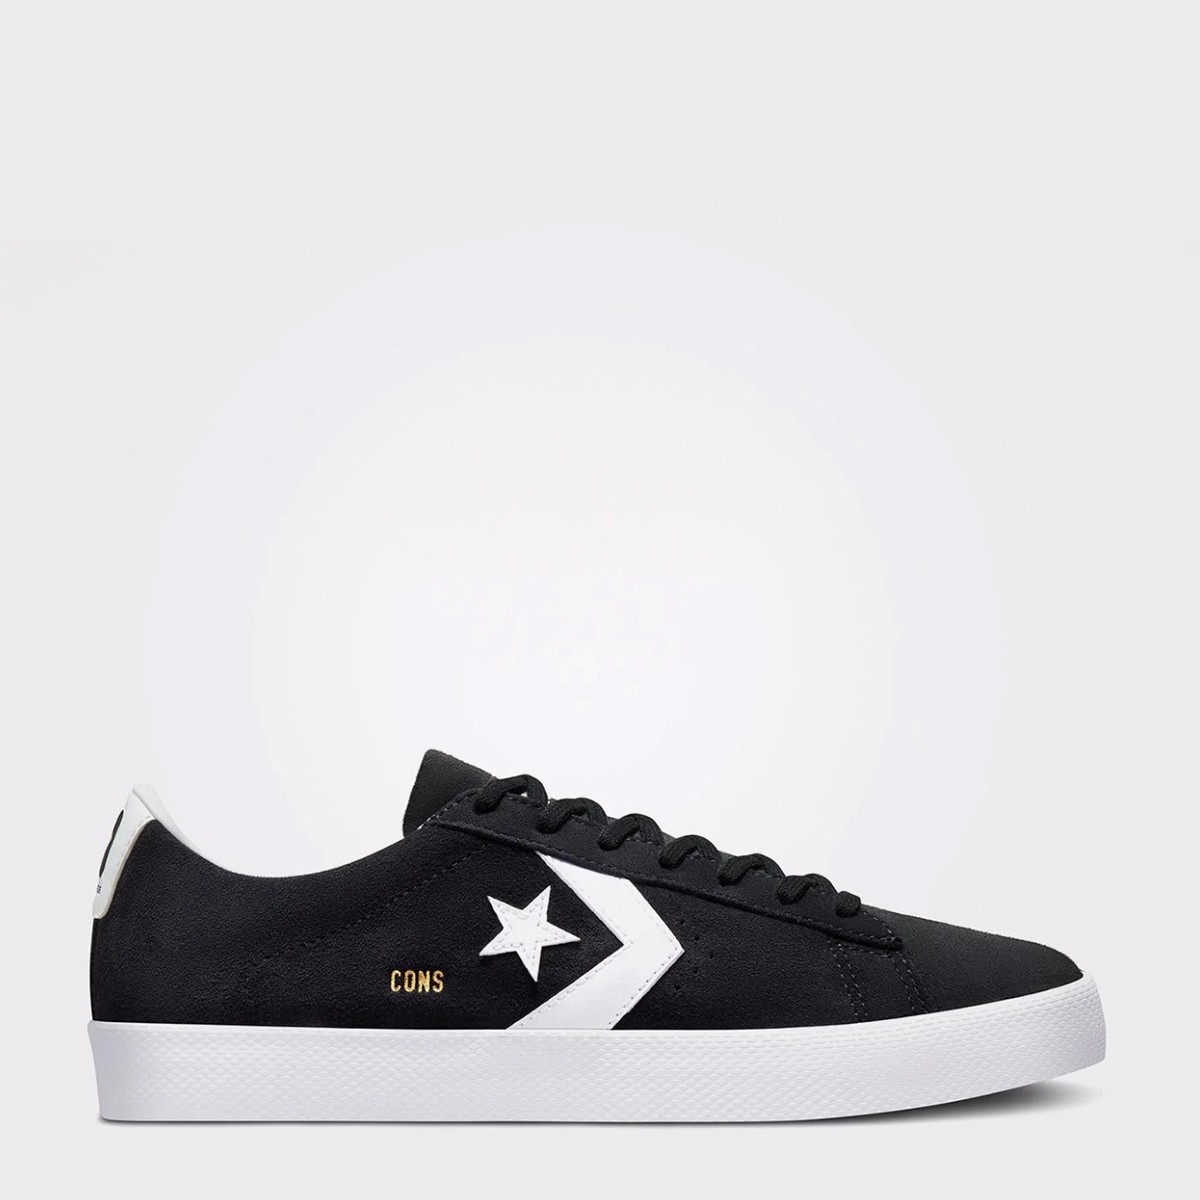 CONVERSE CONS PRO LEATHER VULCANIZED PRO - A00368C.001